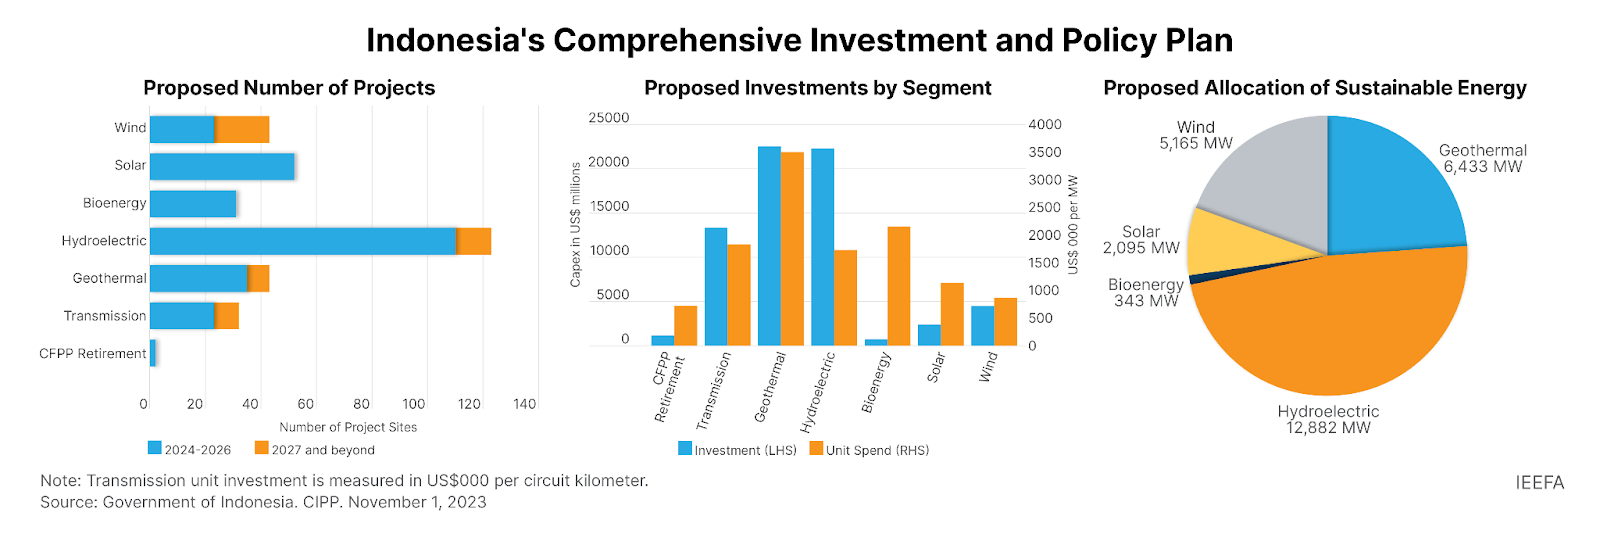 Indonesia's Comprehensive Investment and Policy Plan, Source: IEEFA